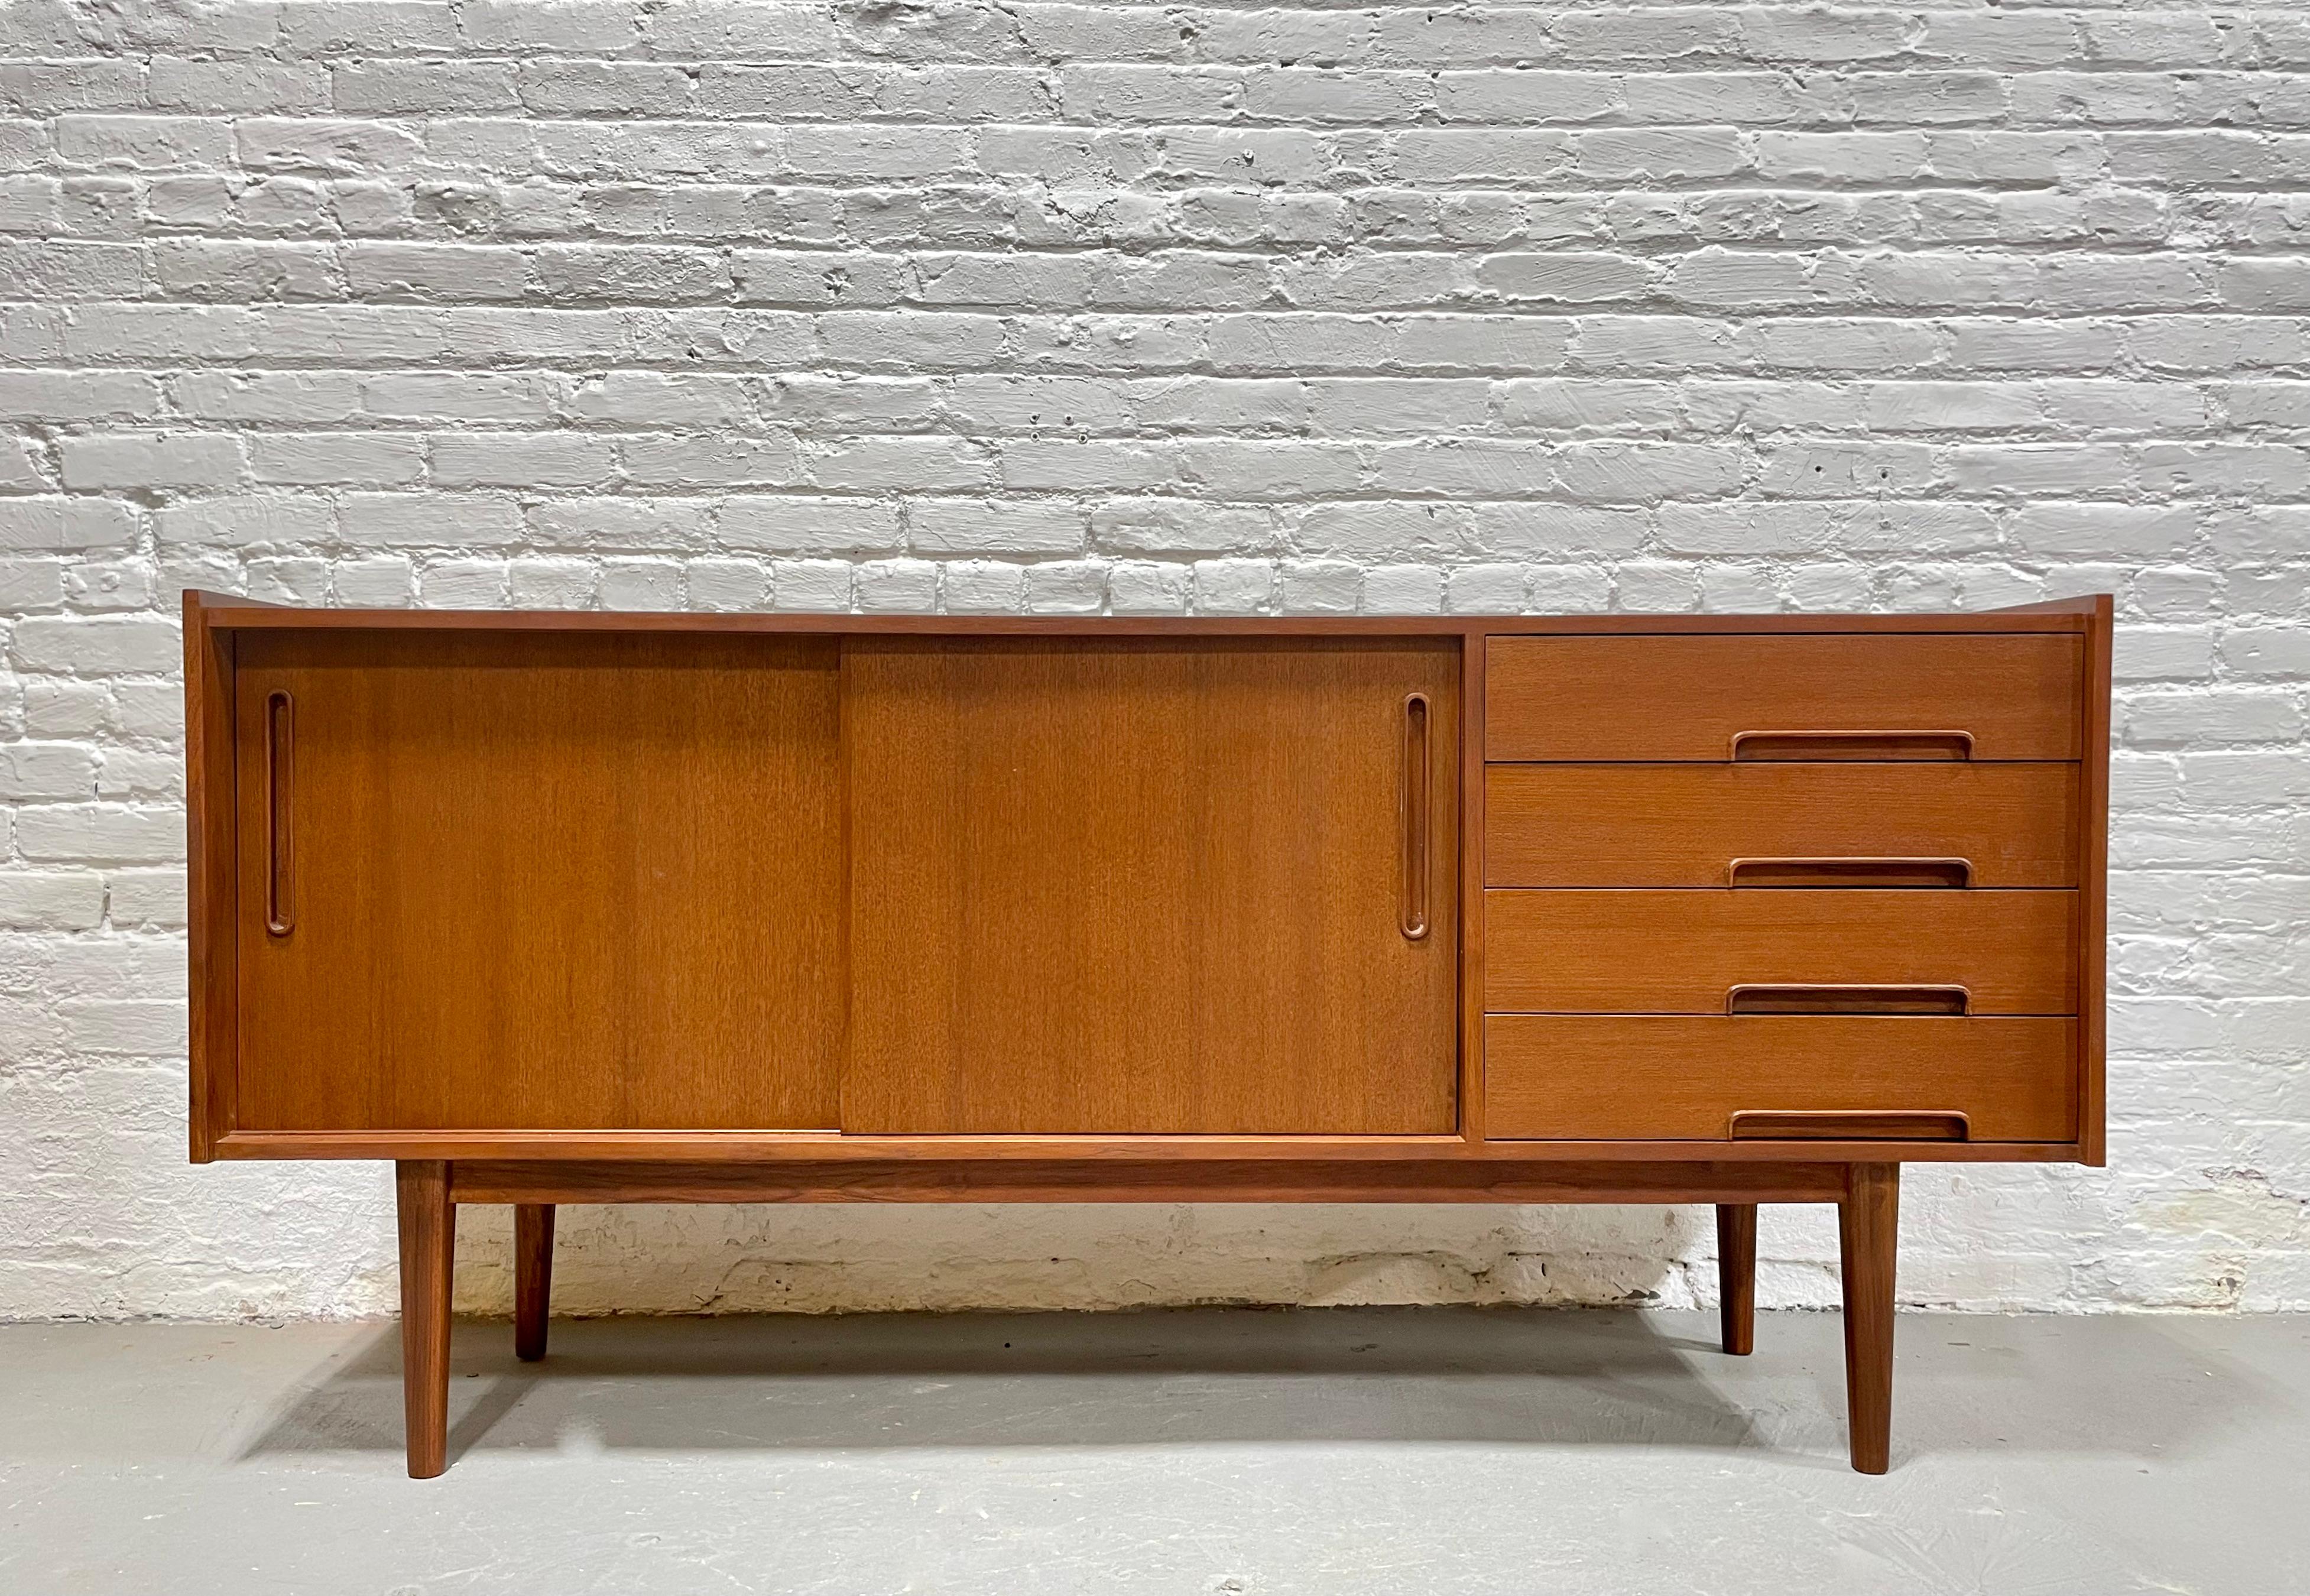 Sleek Mid-Century Modern Styled Teak Credenza / Media Stand In New Condition For Sale In Weehawken, NJ